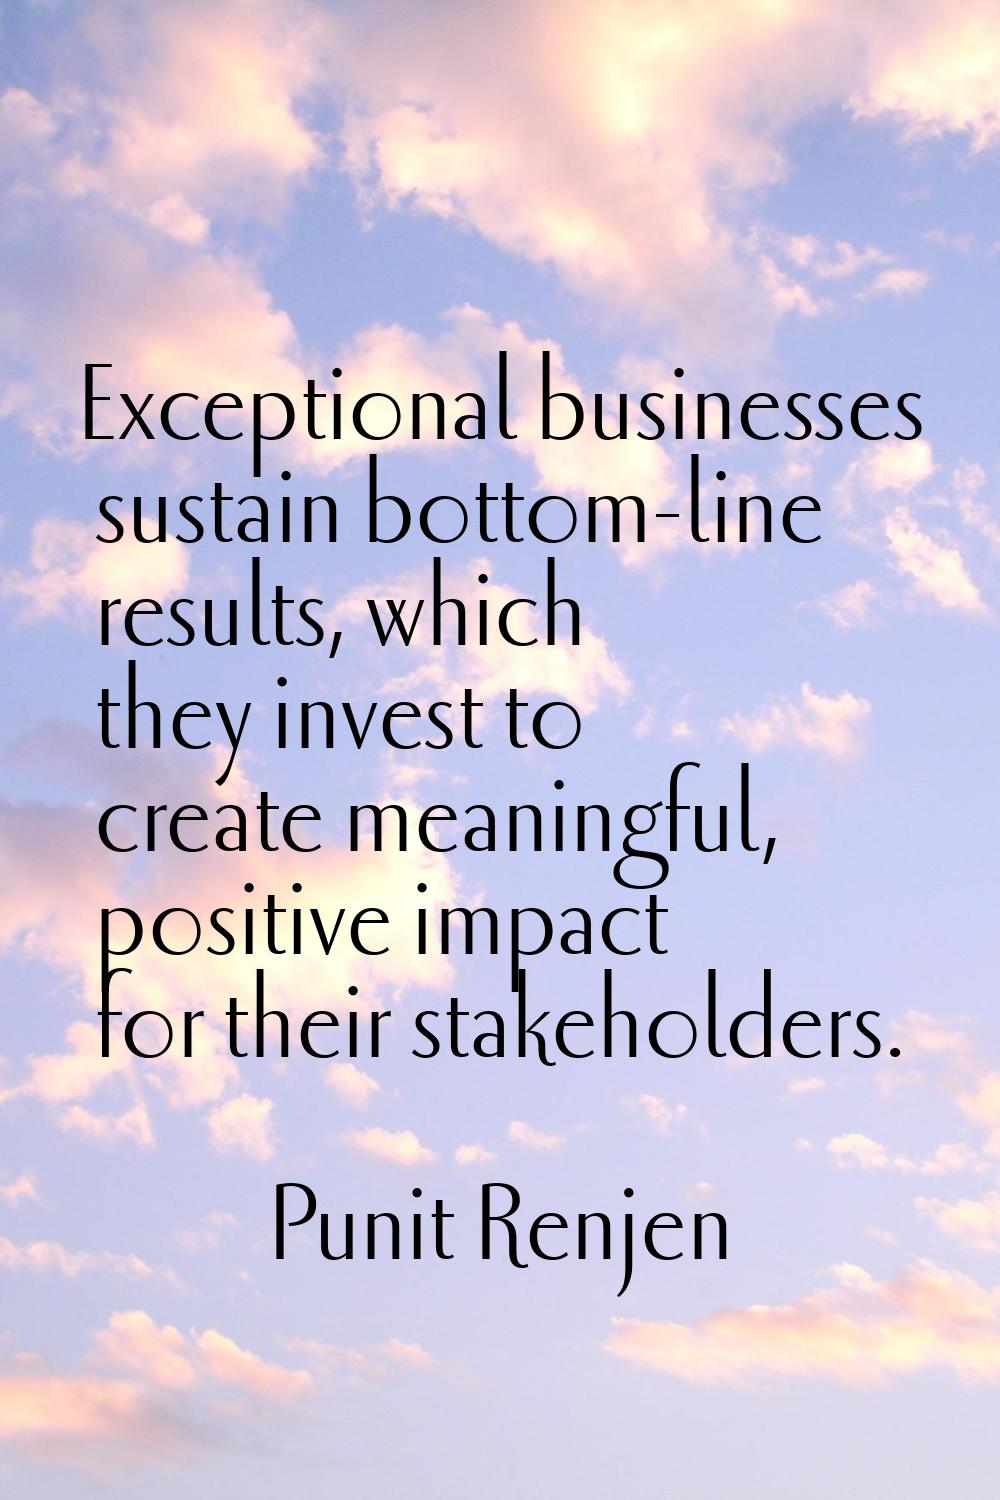 Exceptional businesses sustain bottom-line results, which they invest to create meaningful, positiv